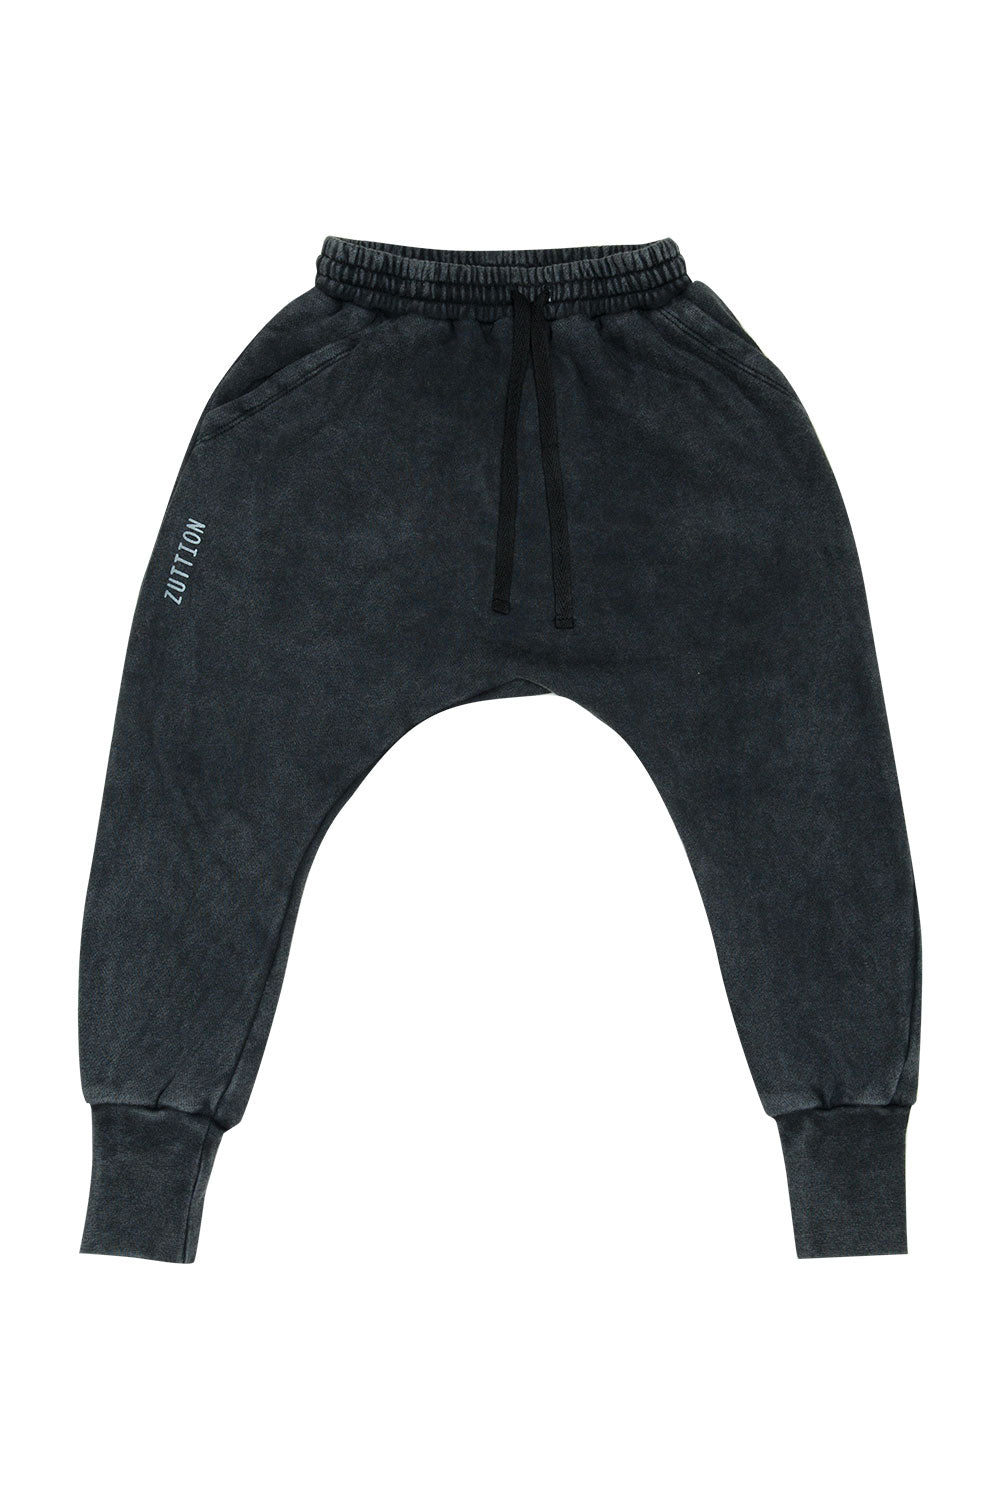 LOW CROTCH TRACKIE PANT CHARCOAL